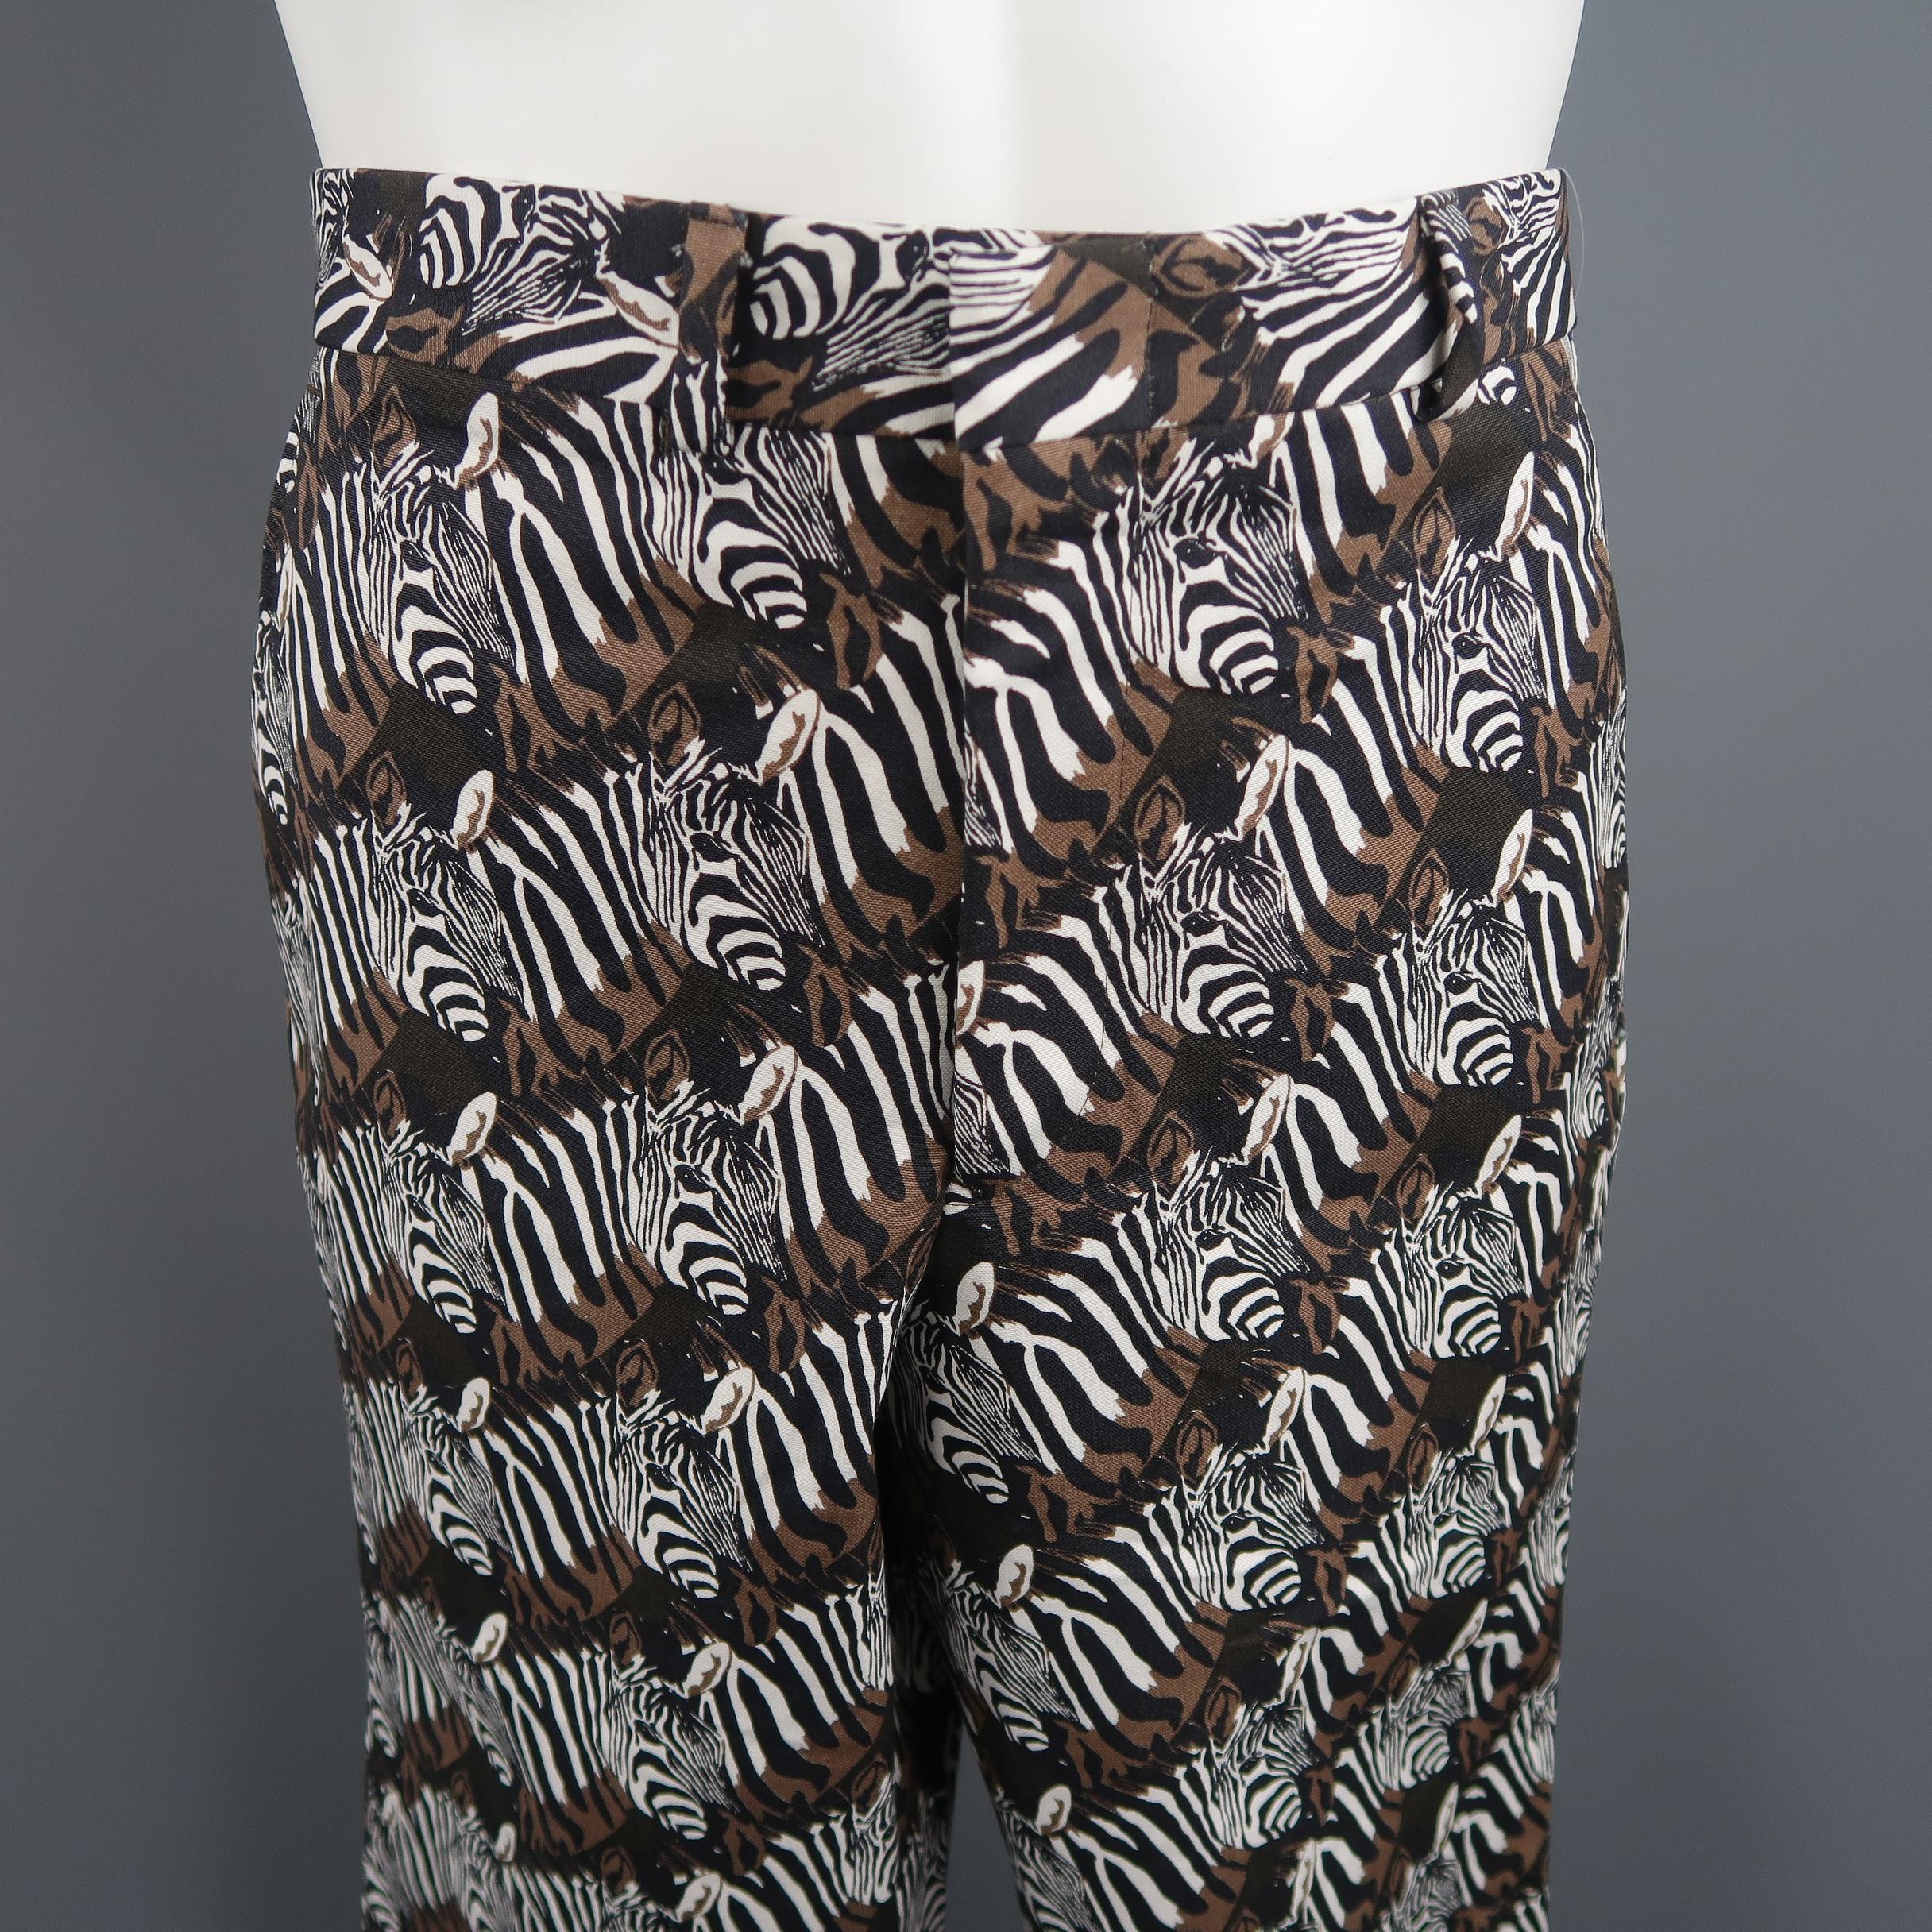 Gitman Vintage statement trousers come in a black, white, and brown zebra graphic print cotton canvas with welt pockets, and a tapered leg. Made in USA.
 
Brand New.
Marked: 33
 
Measurements:
 
Waist: 33 in.
Rise: 10 in.
Inseam: 35 in.